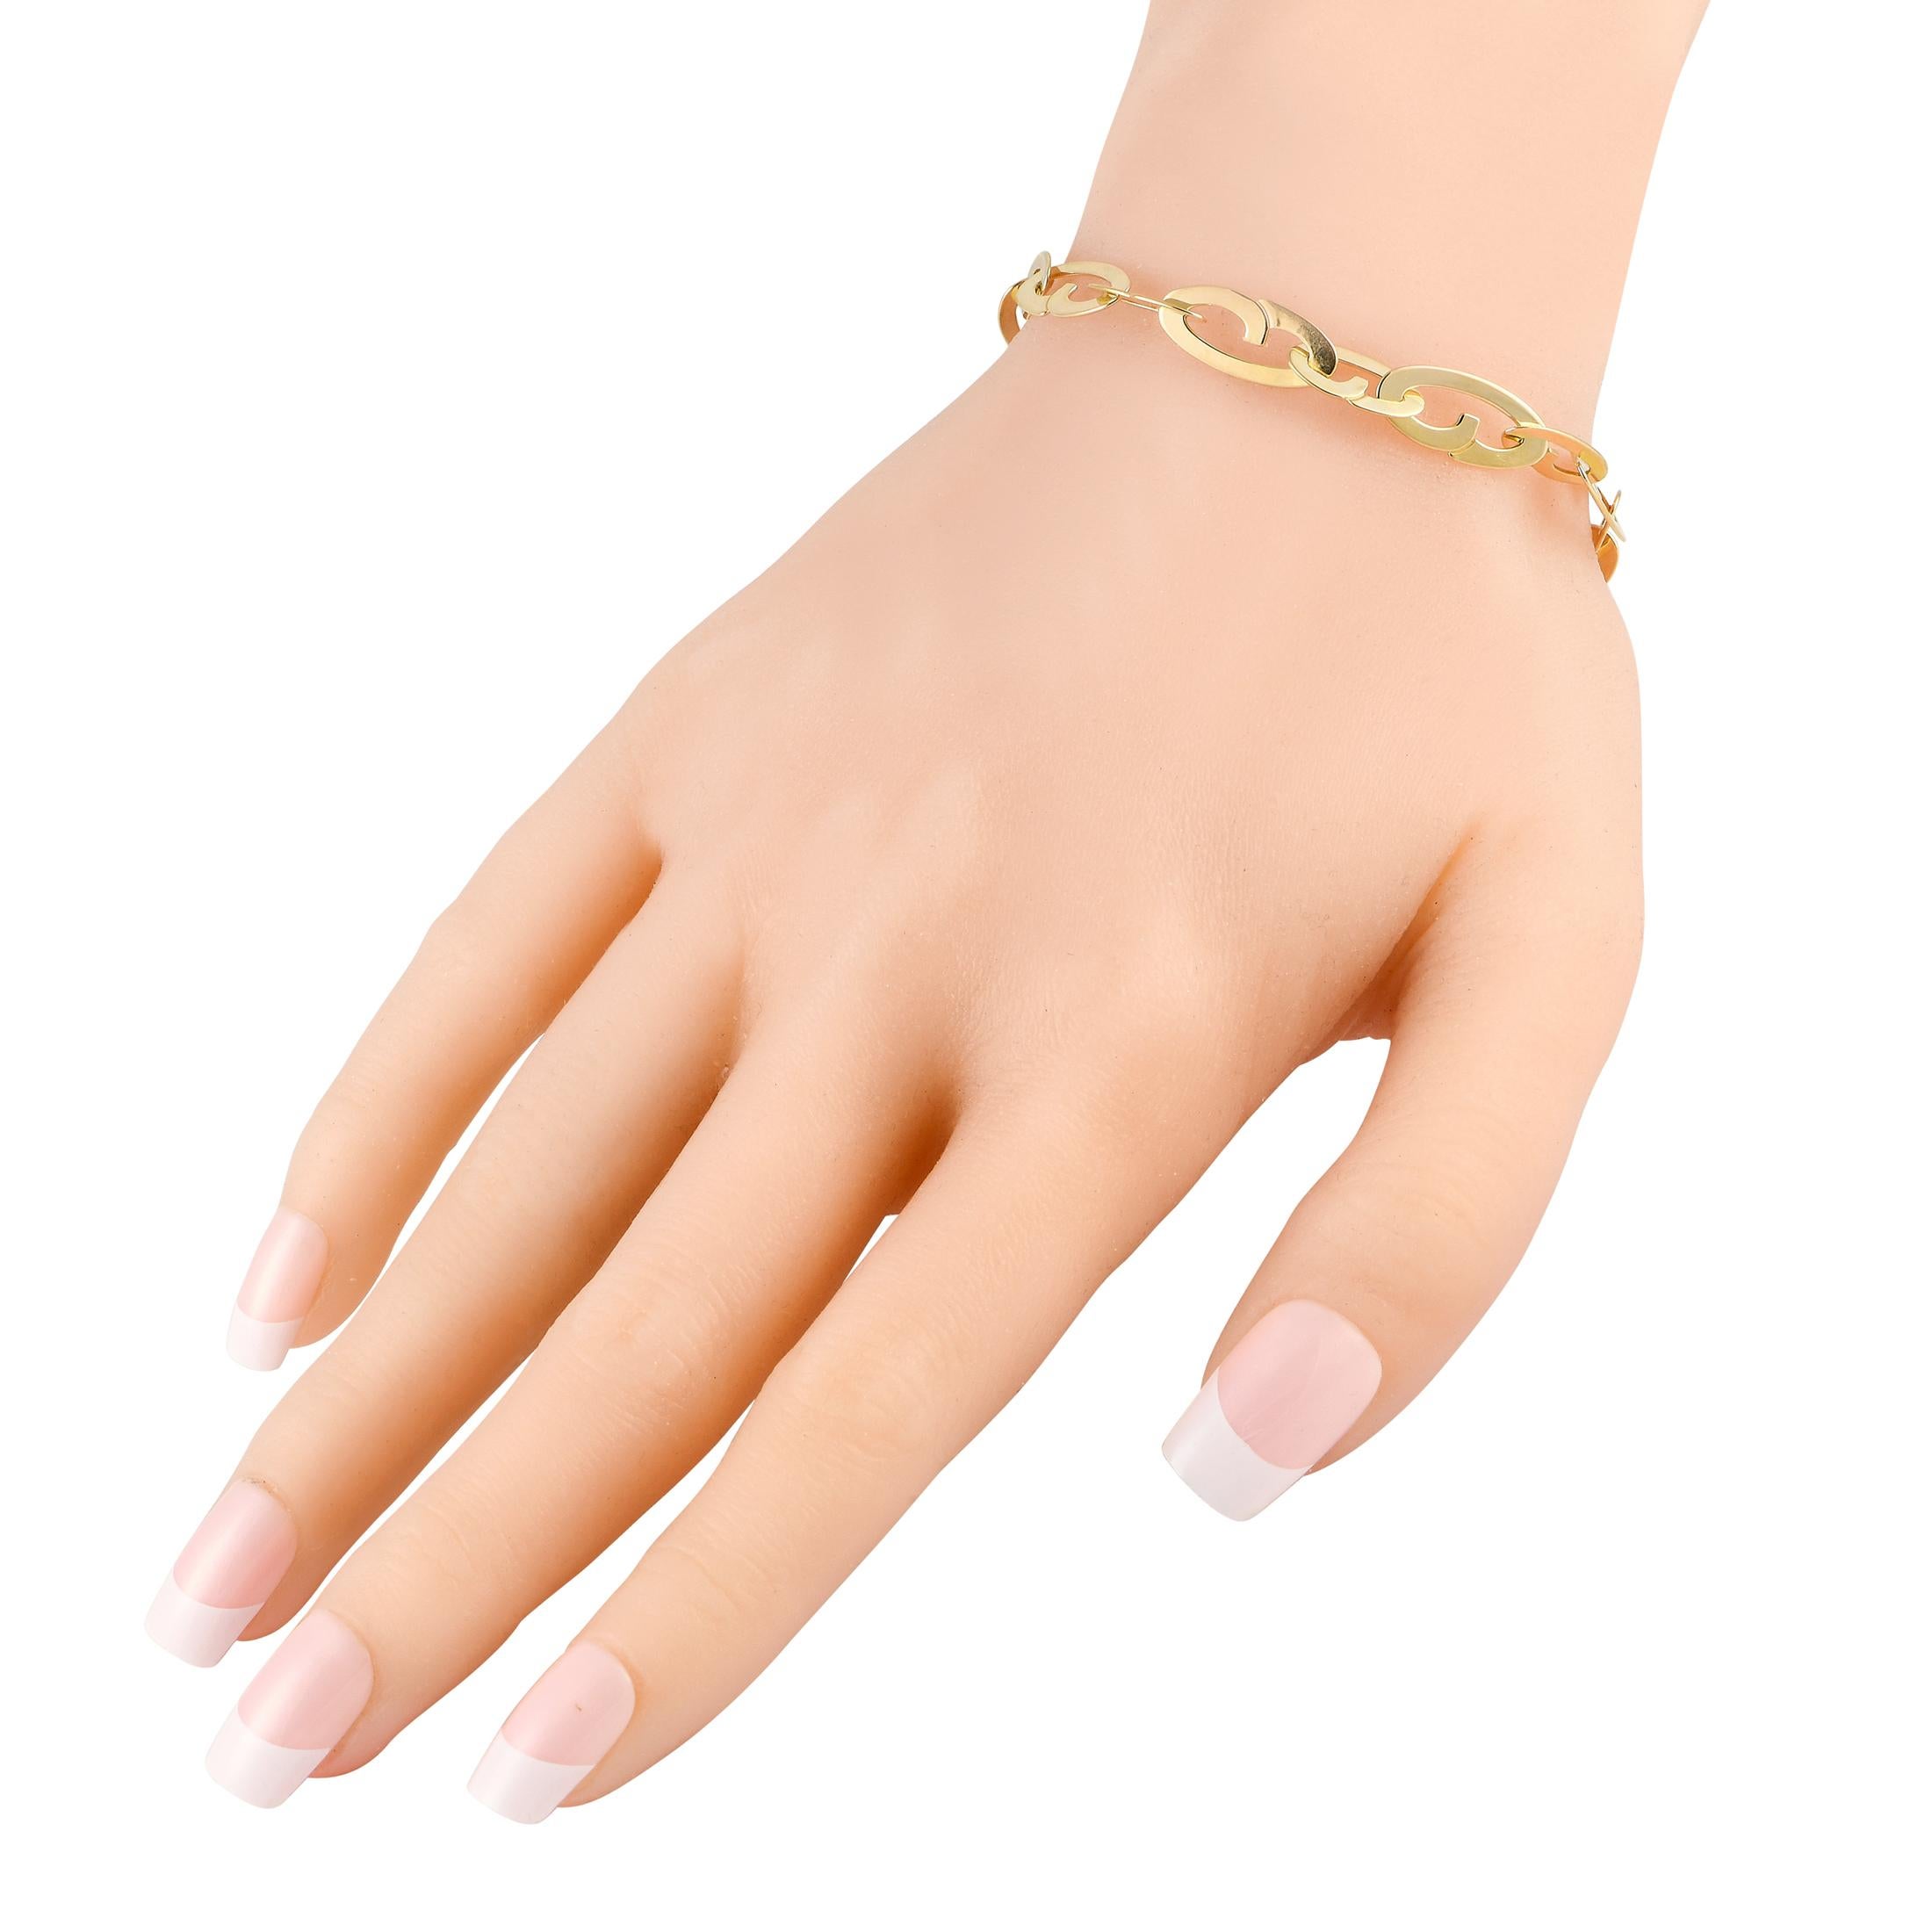 If major bling isn't your thing, then this Roberto Coin creation is for you. The bracelet features a chain of flat links in 18K yellow gold, terminating to a toggle clasp with sapphire embellishment. The understated style of this bracelet wears and